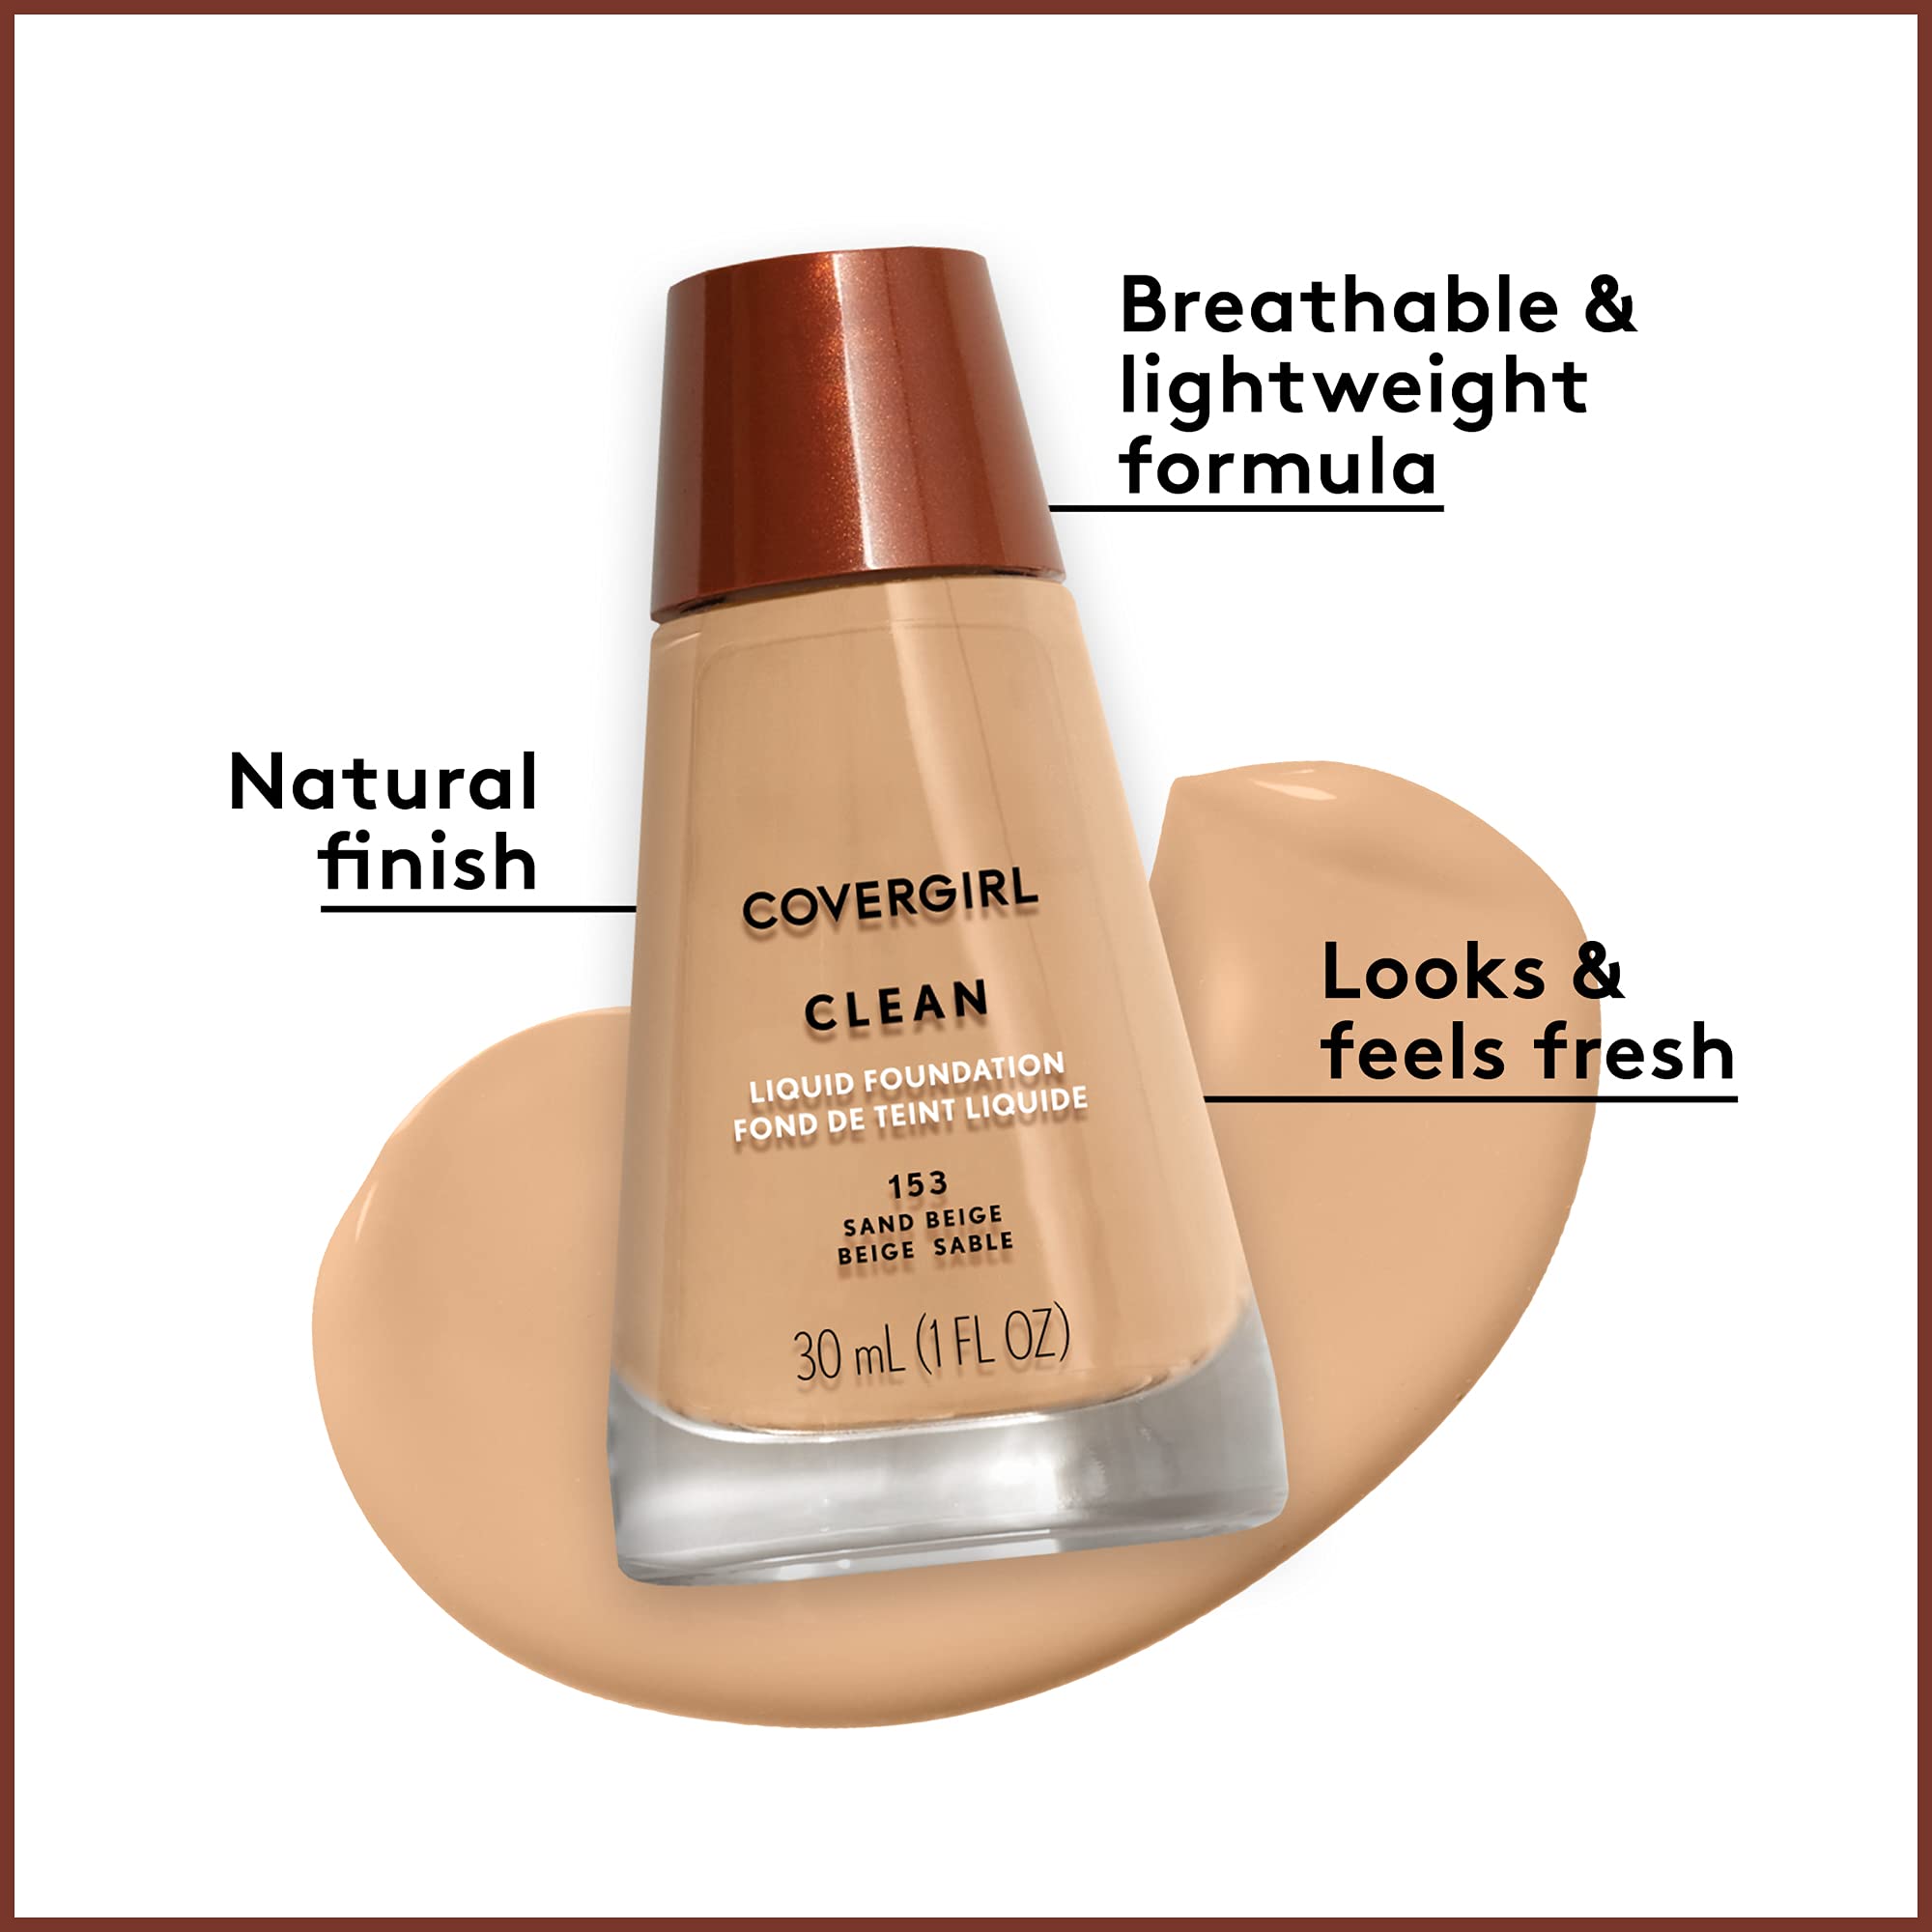 COVERGIRL, Clean Makeup Foundation, Natural Beige, 1 oz, 1 Count (packaging may vary)